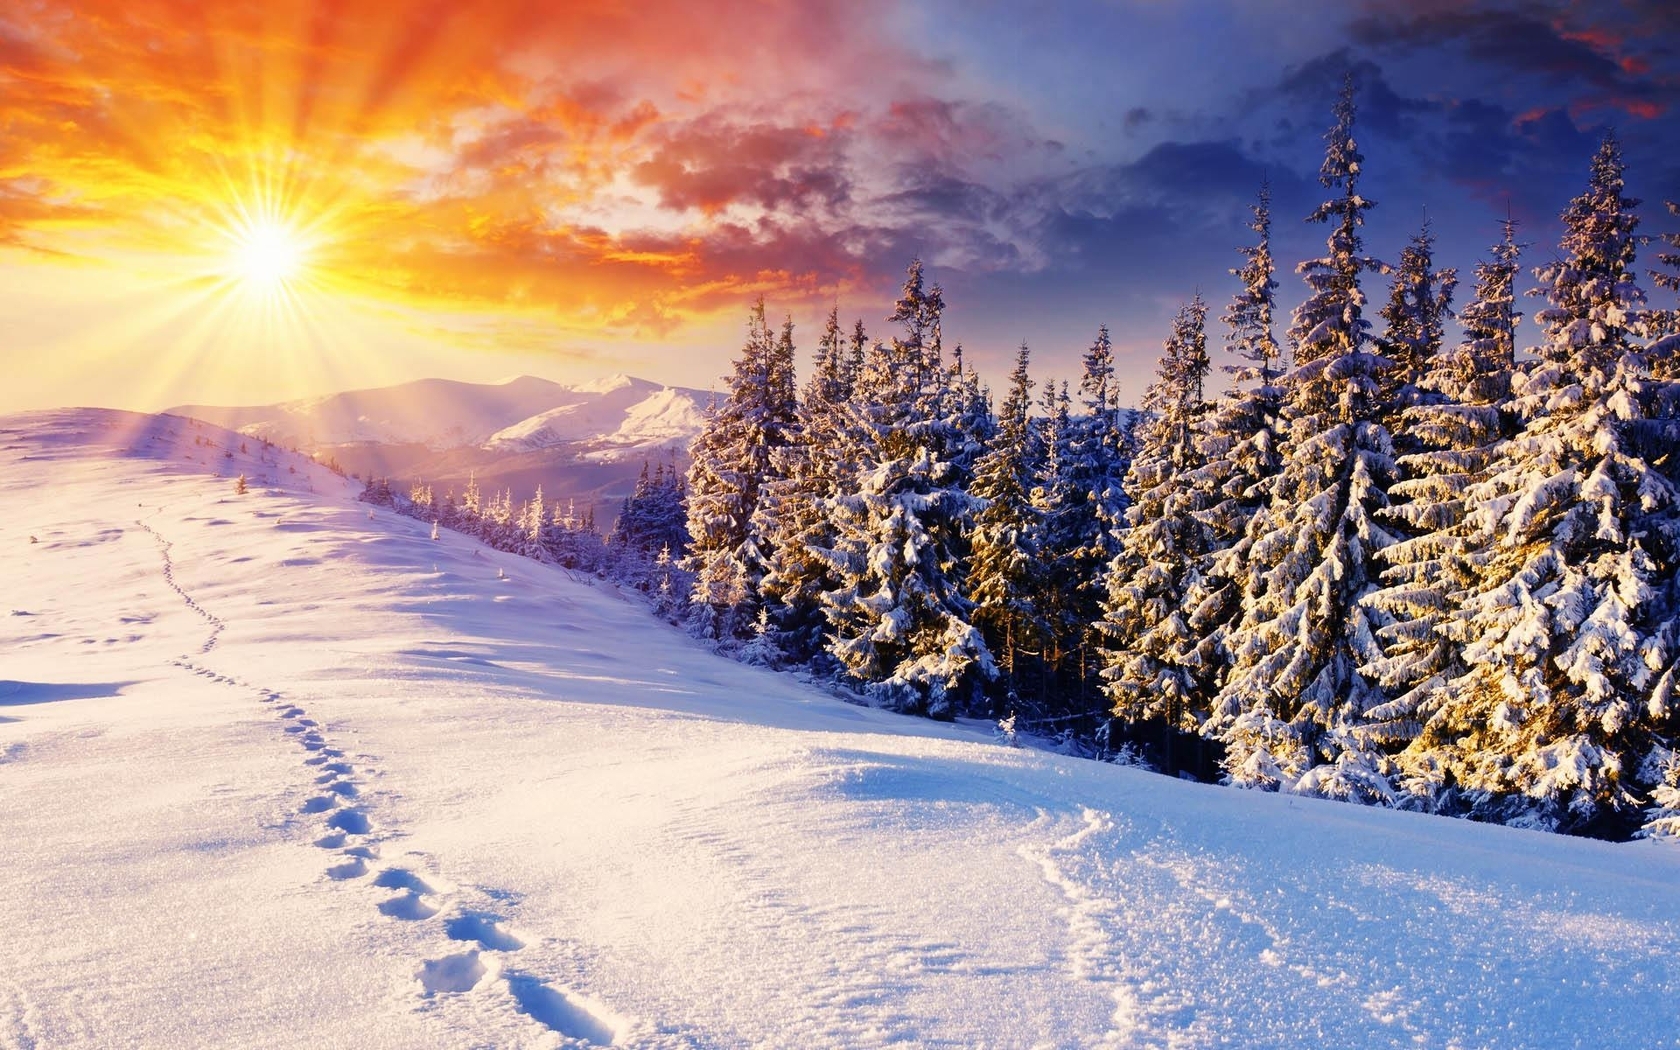 Image: Winter, snow, forest, needles, mountains, sky, sun, rays, traces